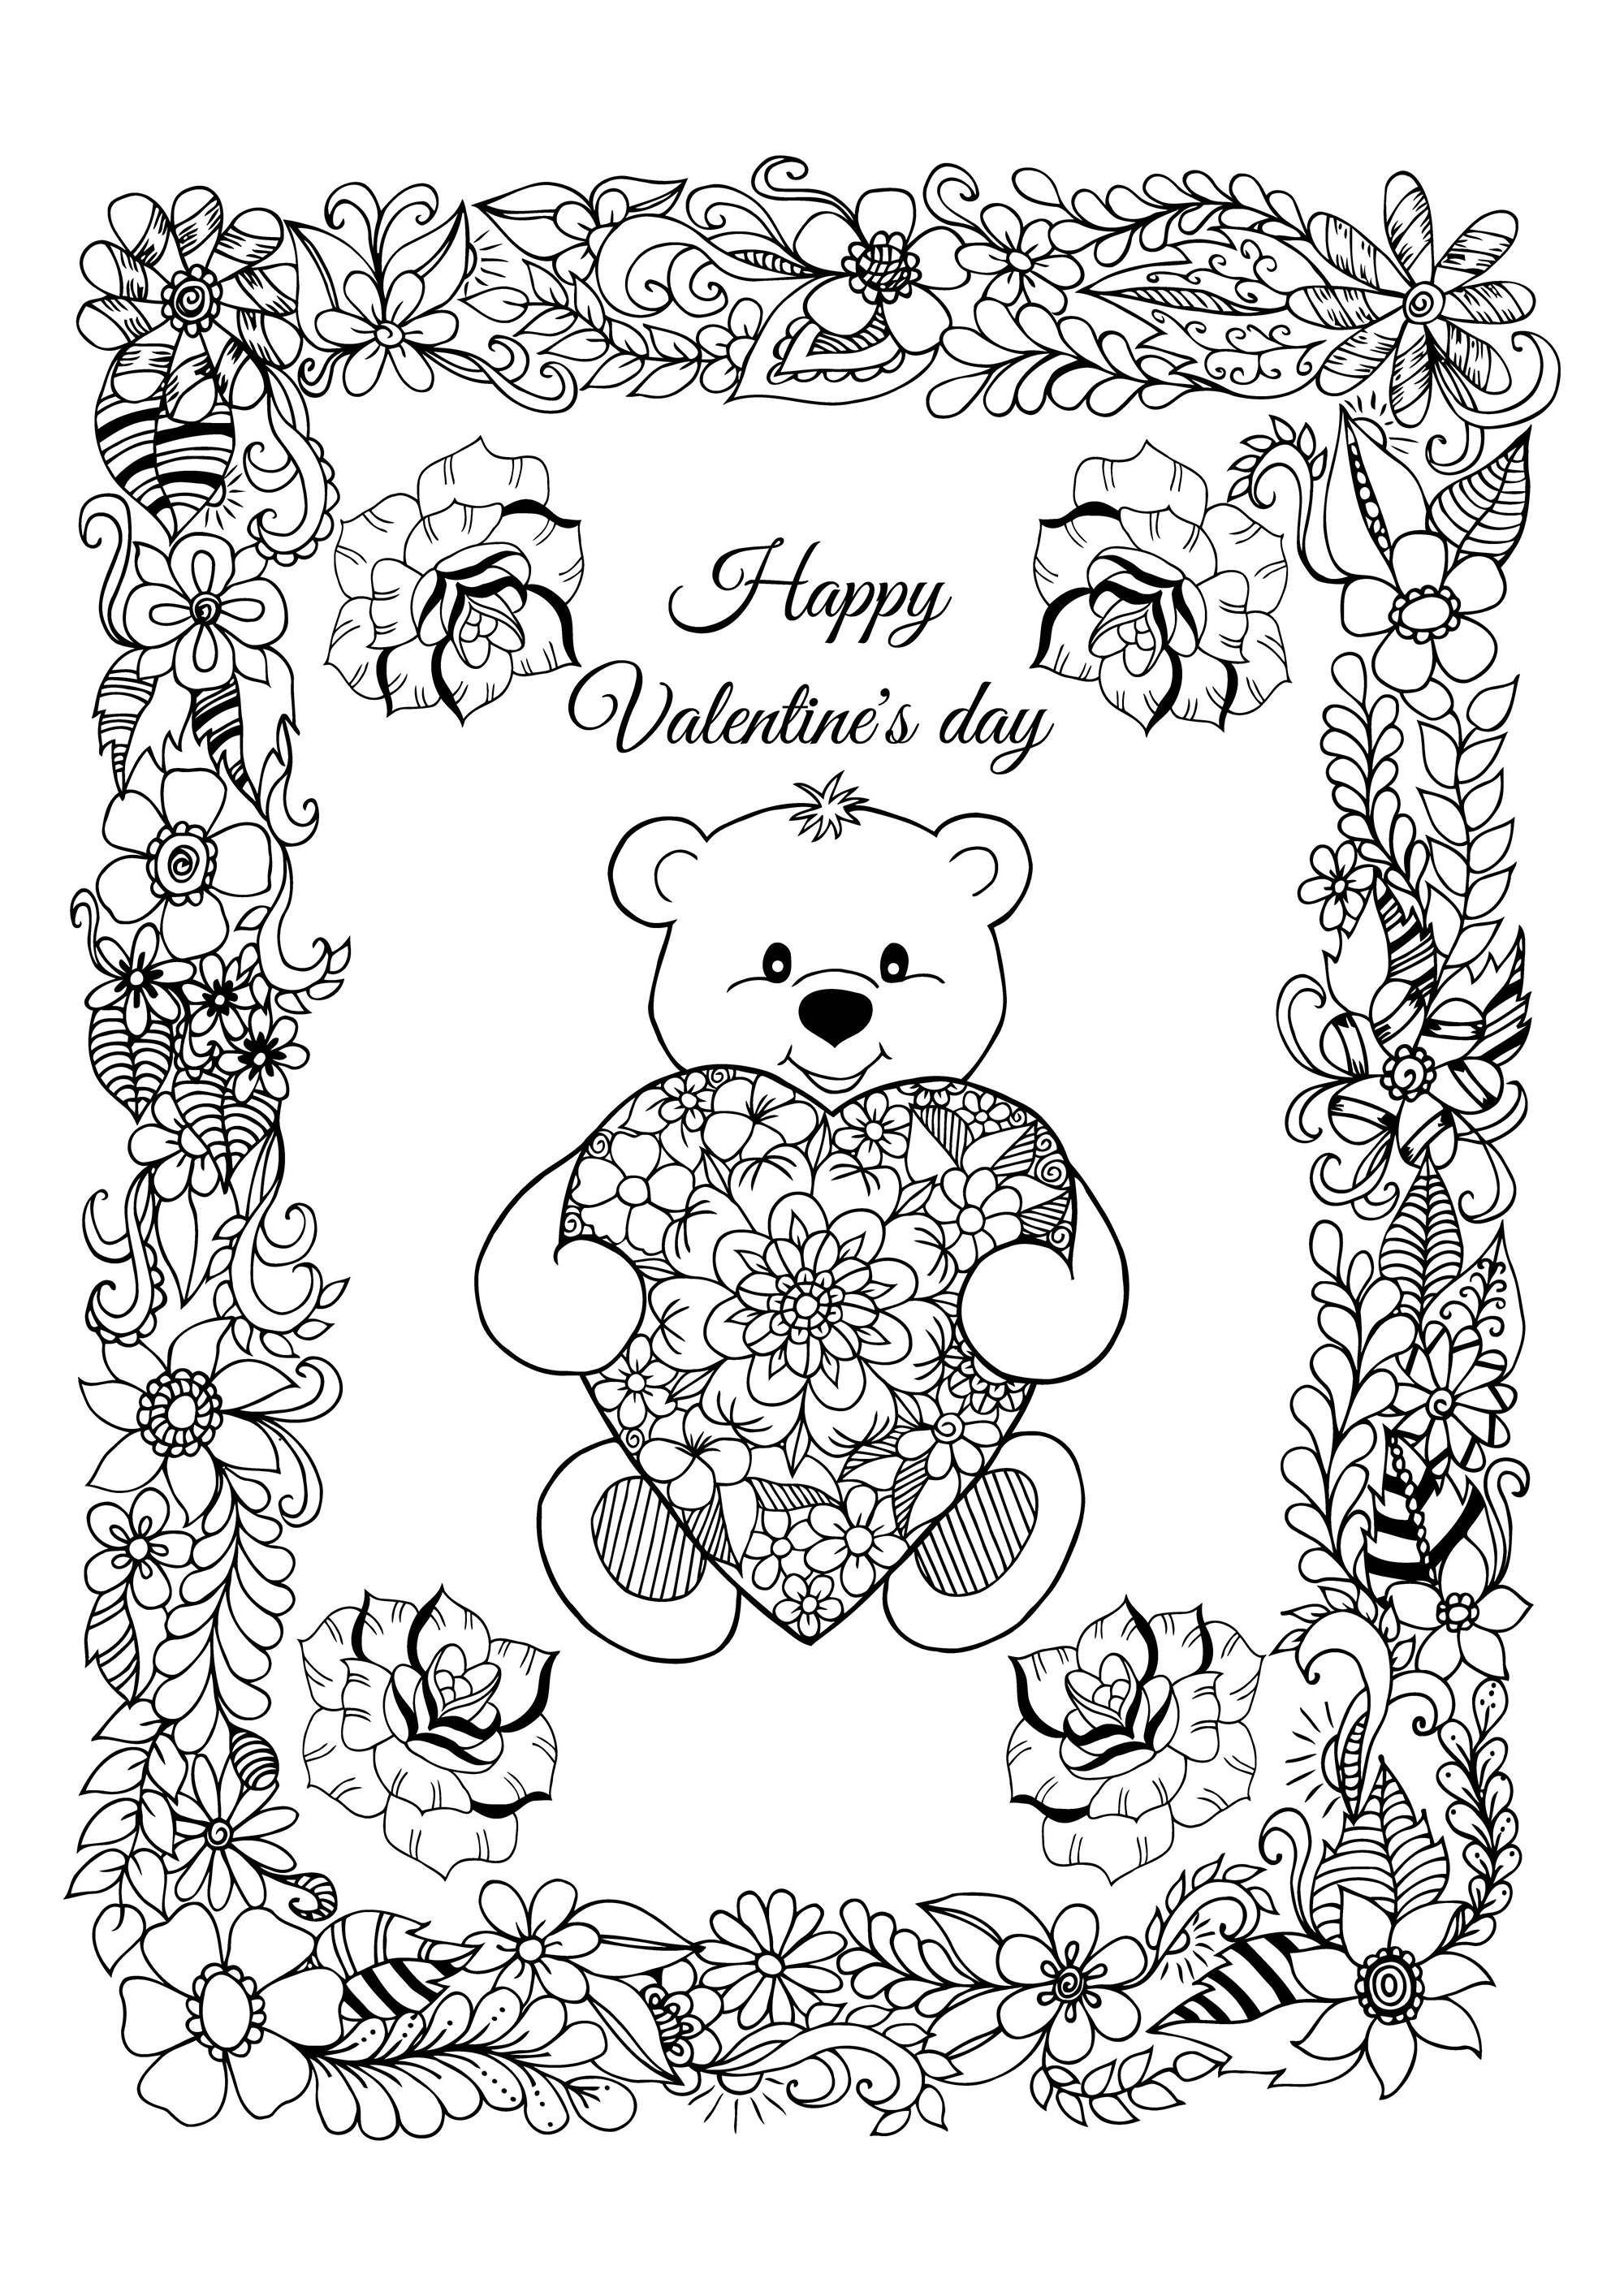 Pretty Valentine's Day card to color, with a cute bear wearing a heart with pretty patterns, and a pretty frame full of flowers, Artist : Maritel67   Source : 123rf